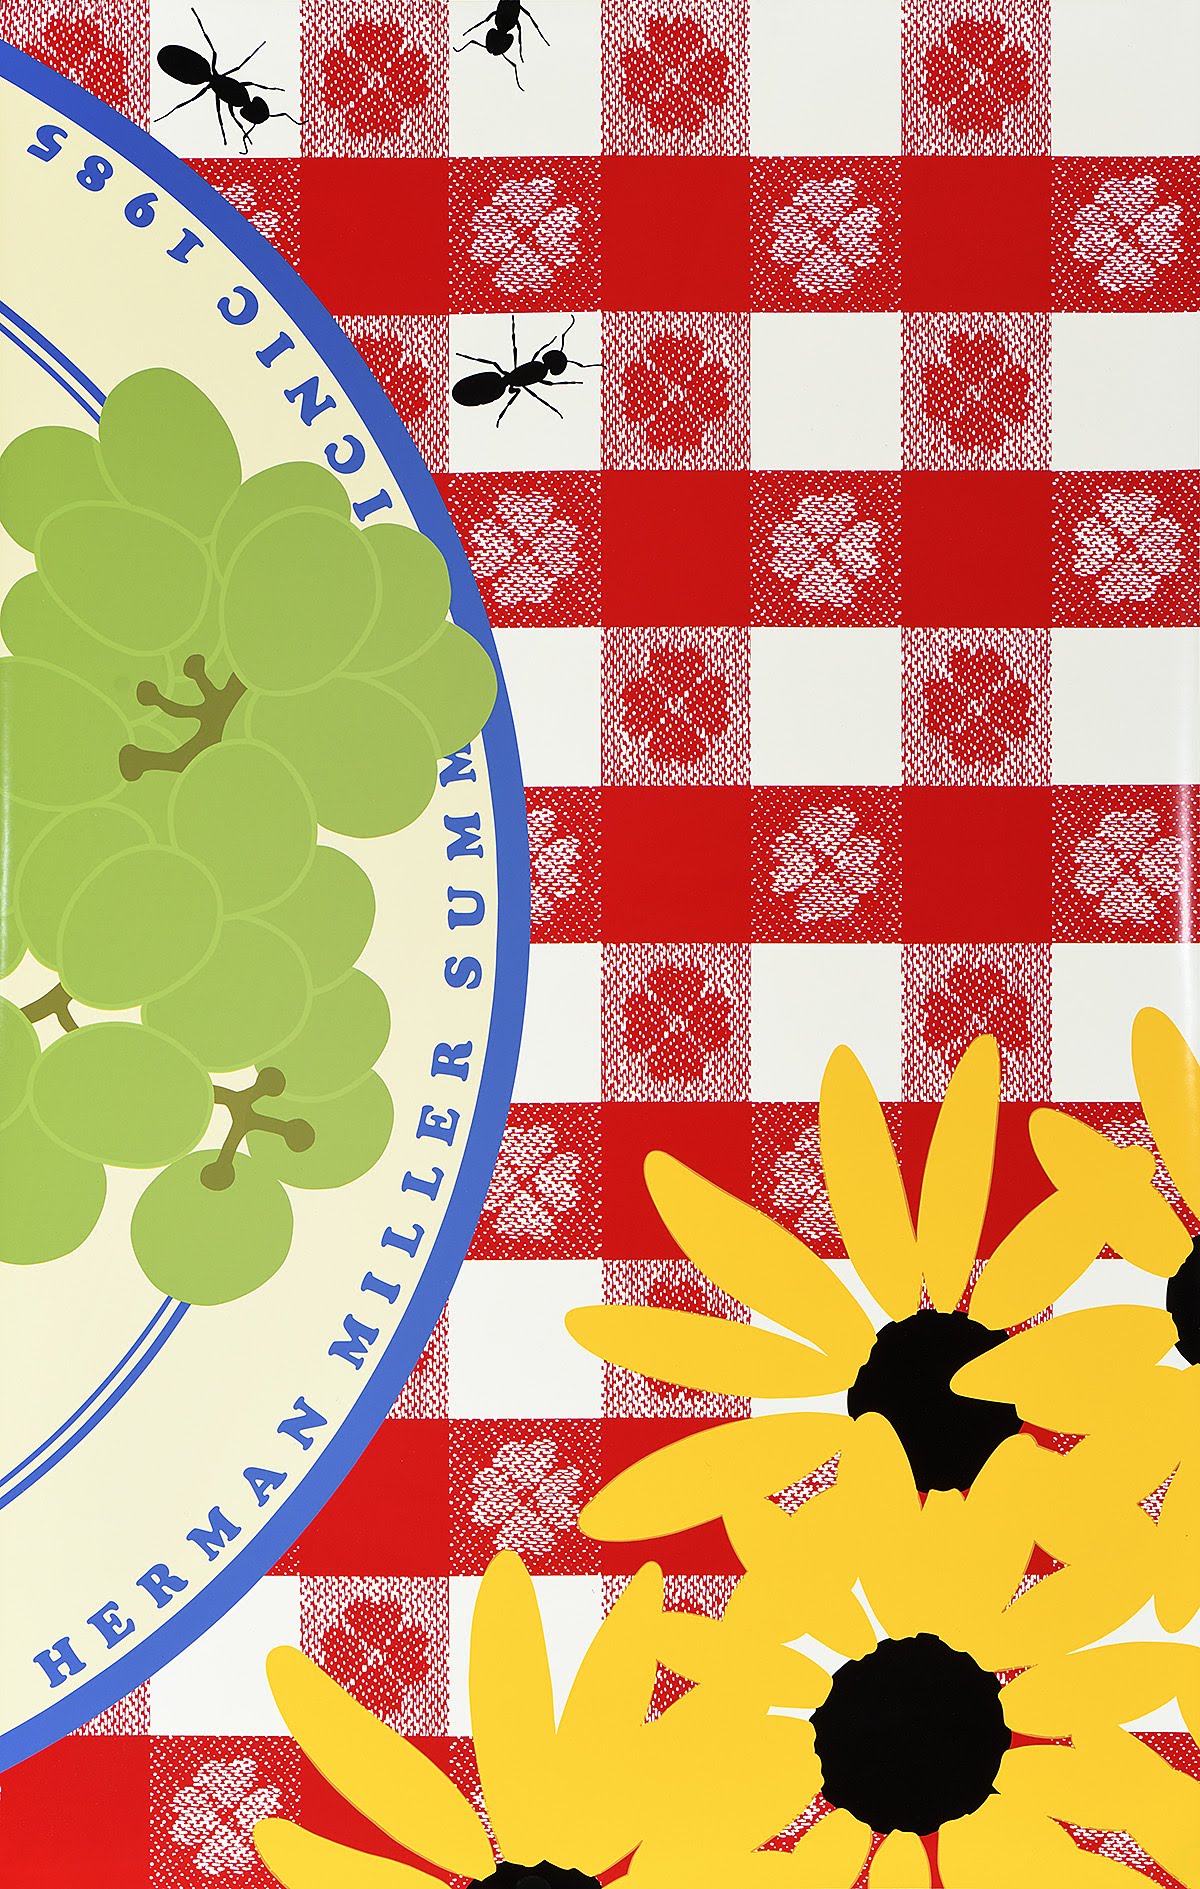 Silkscreen poster of flowers, grapes, and ants on a checkered picnic blanket.